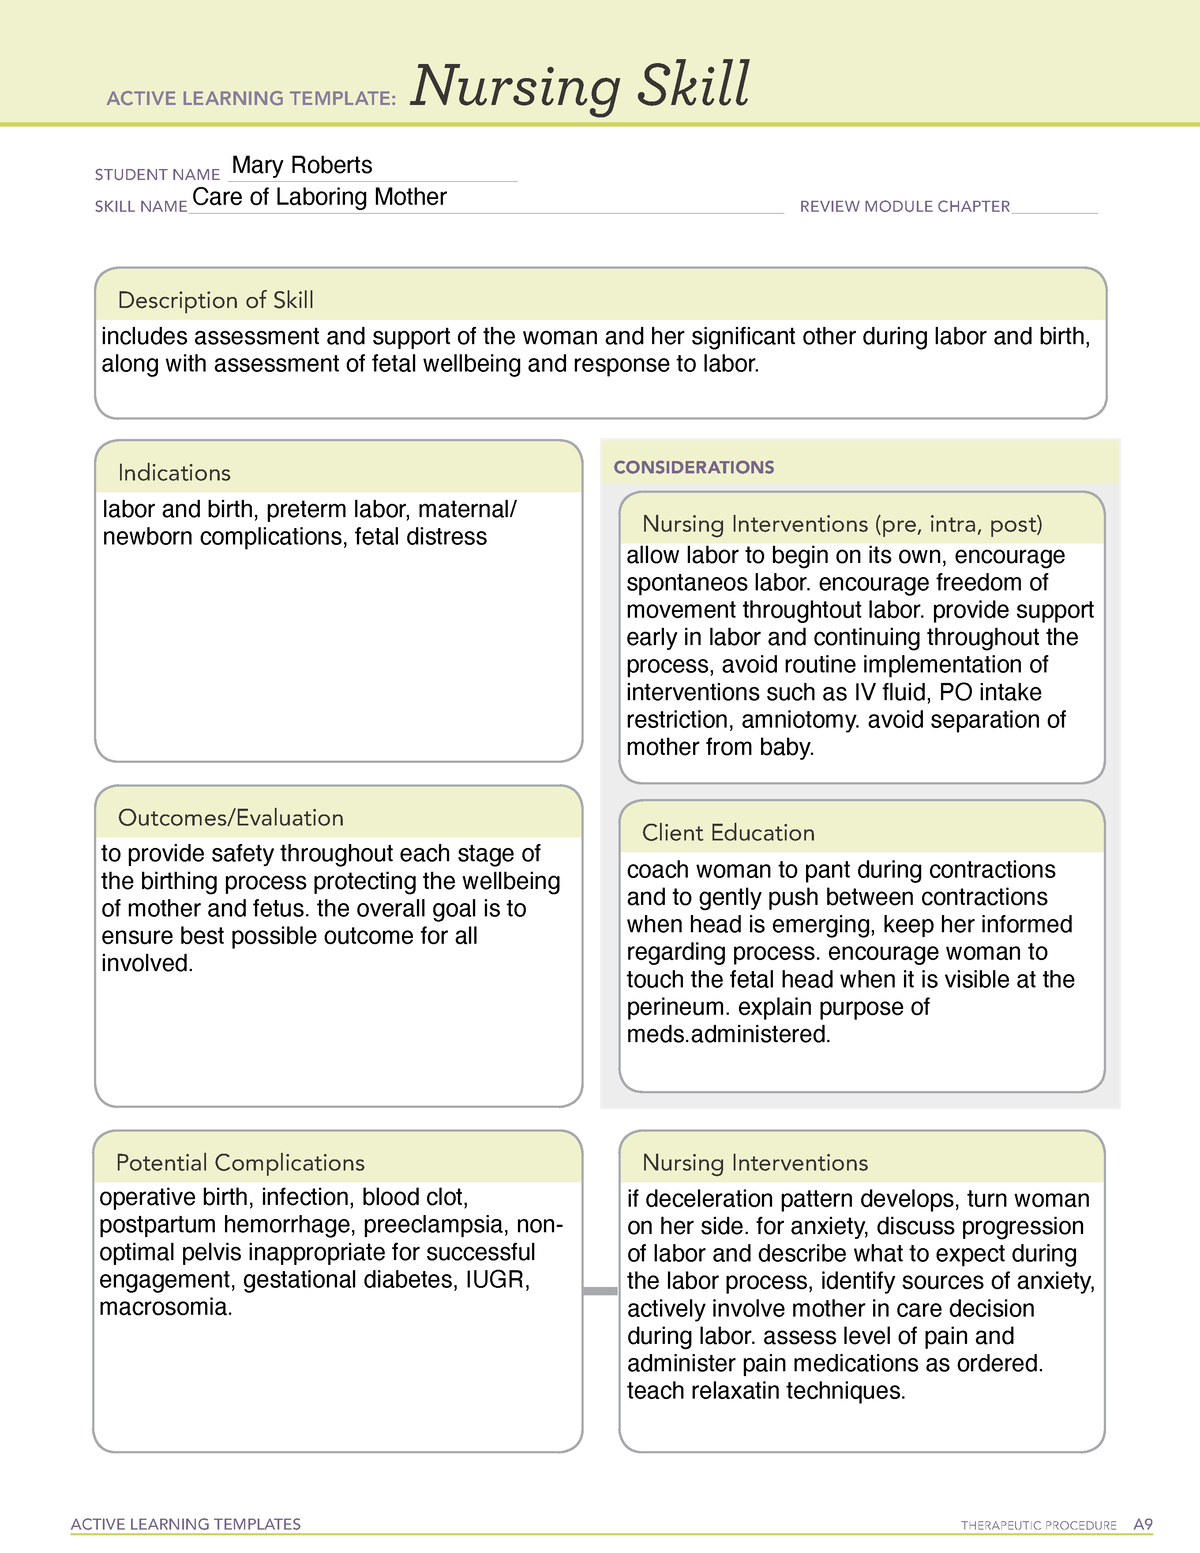 Care of Laboring Mother - ACTIVE LEARNING TEMPLATES THERAPEUTIC ...